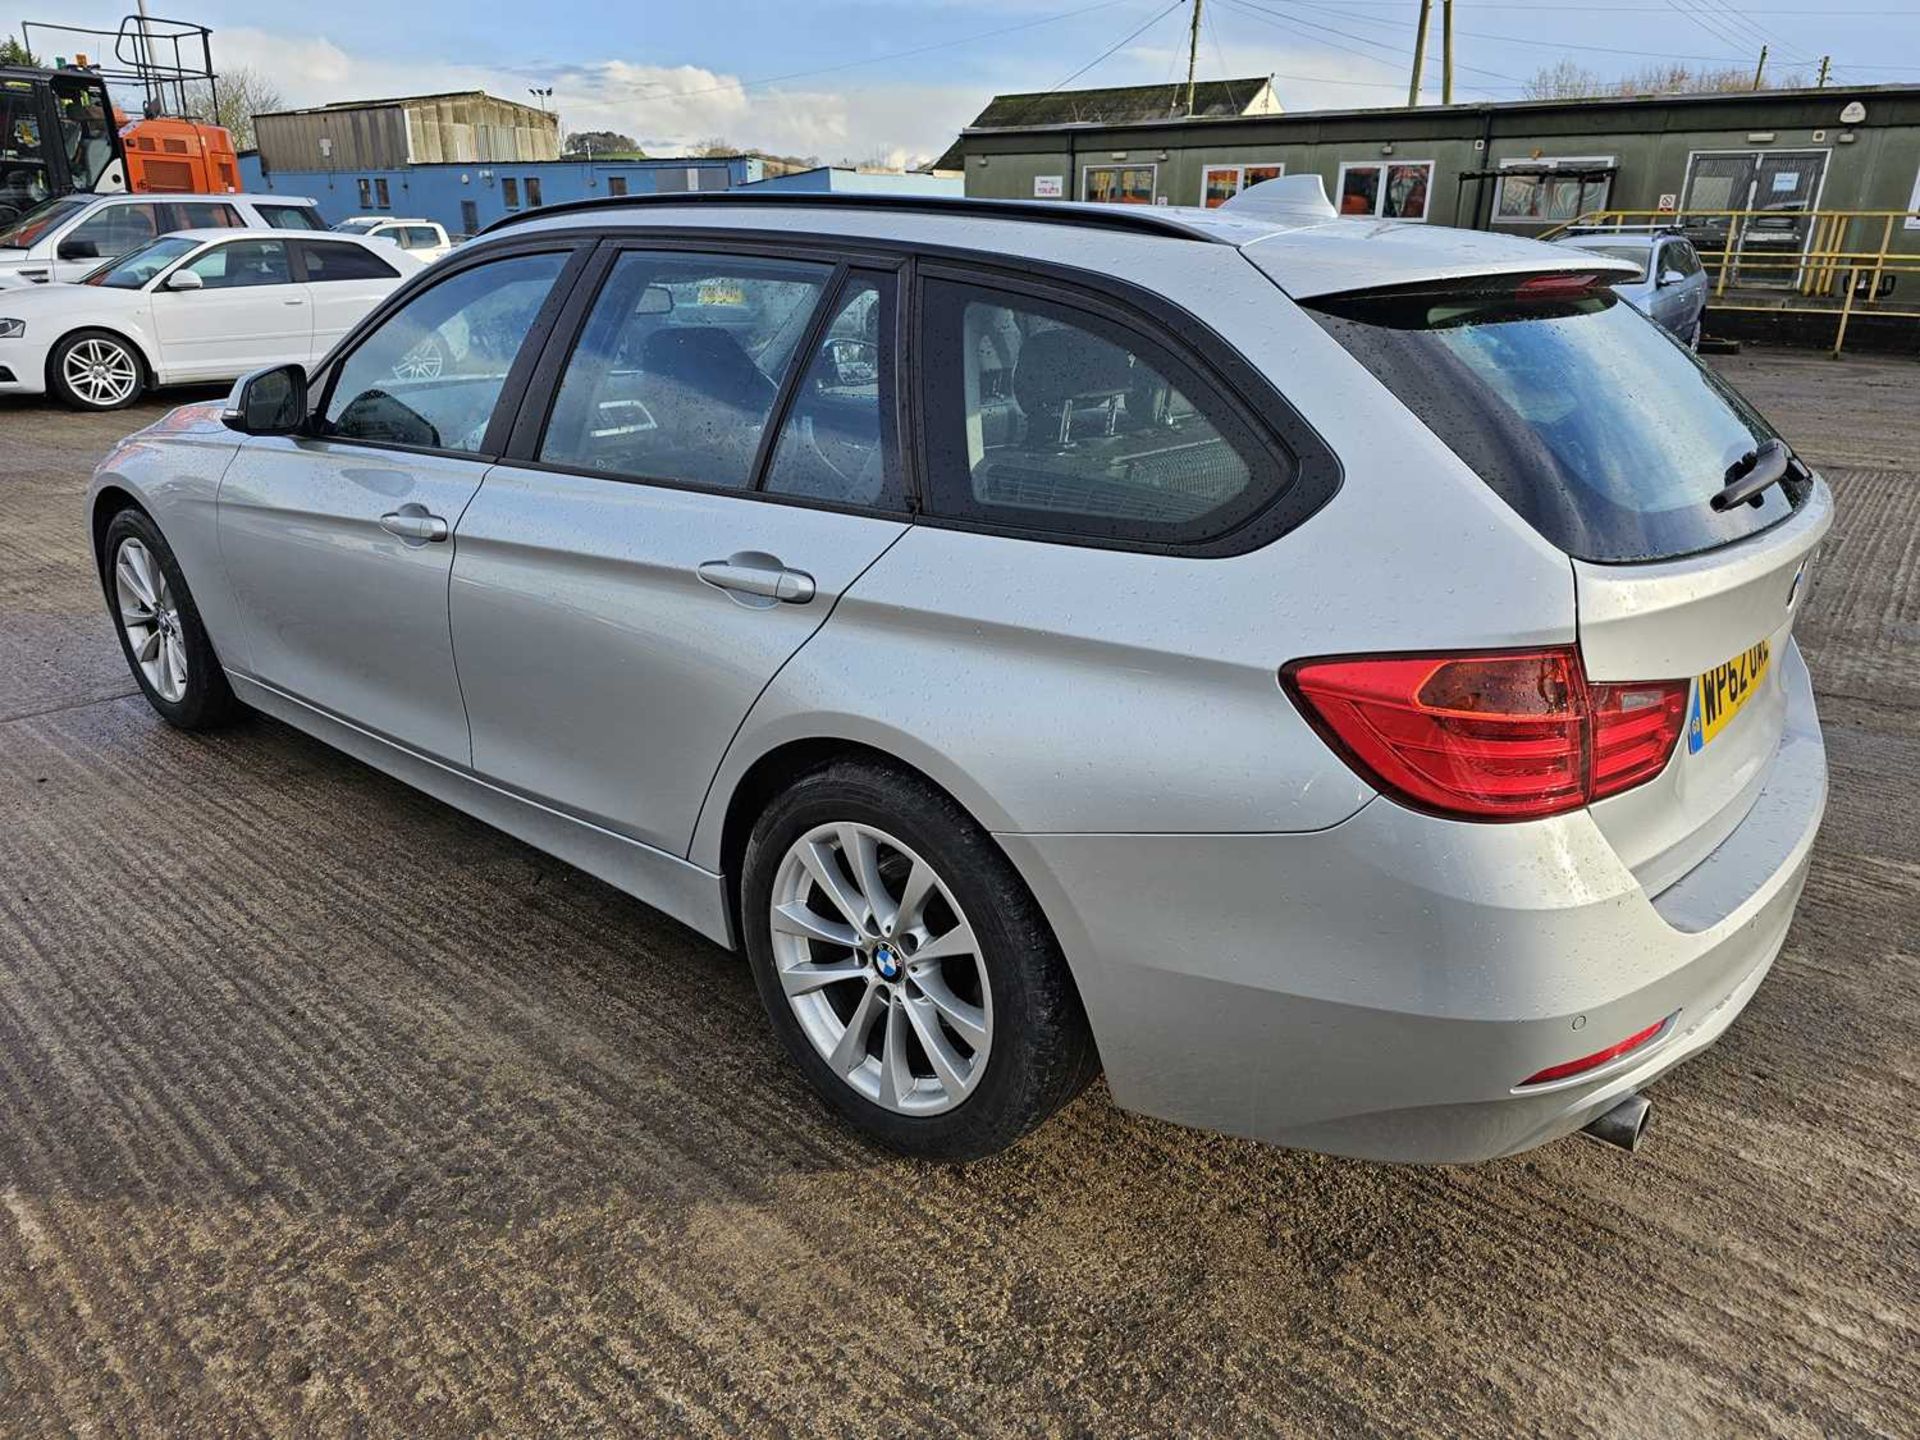 2013 BMW 320D Estate, Auto, Parking Sensors, Full Leather, Heated Seats, Bluetooth, Cruise Control,  - Image 2 of 29